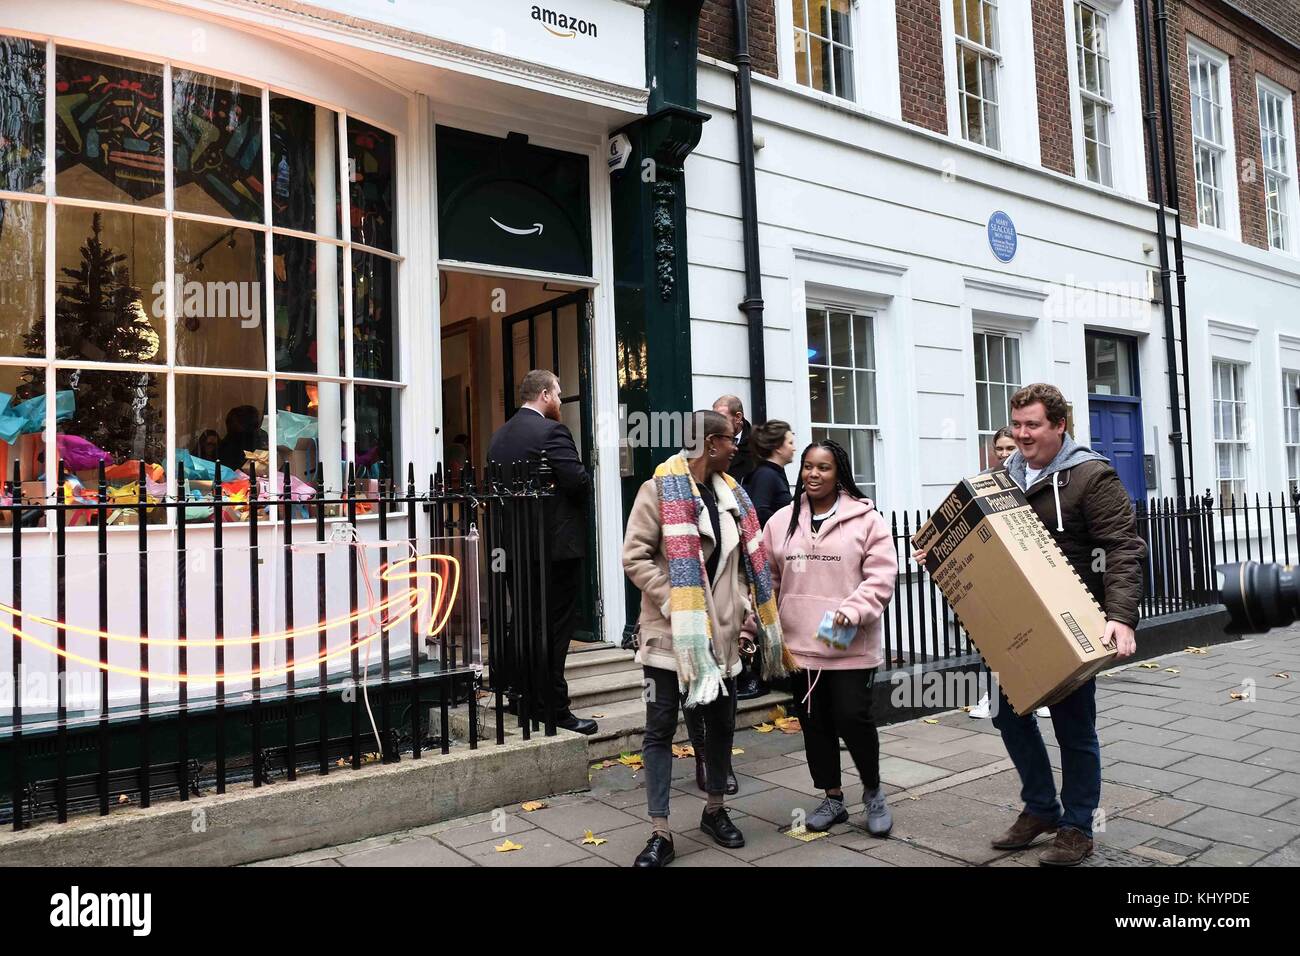 London, UK. 21st Nov, 2017. London 21st November 2017.Online retailer Amazon  opens a pop- up shop in Soho Square, Central London on the 21st November  2017.As part of their Black Friday sales